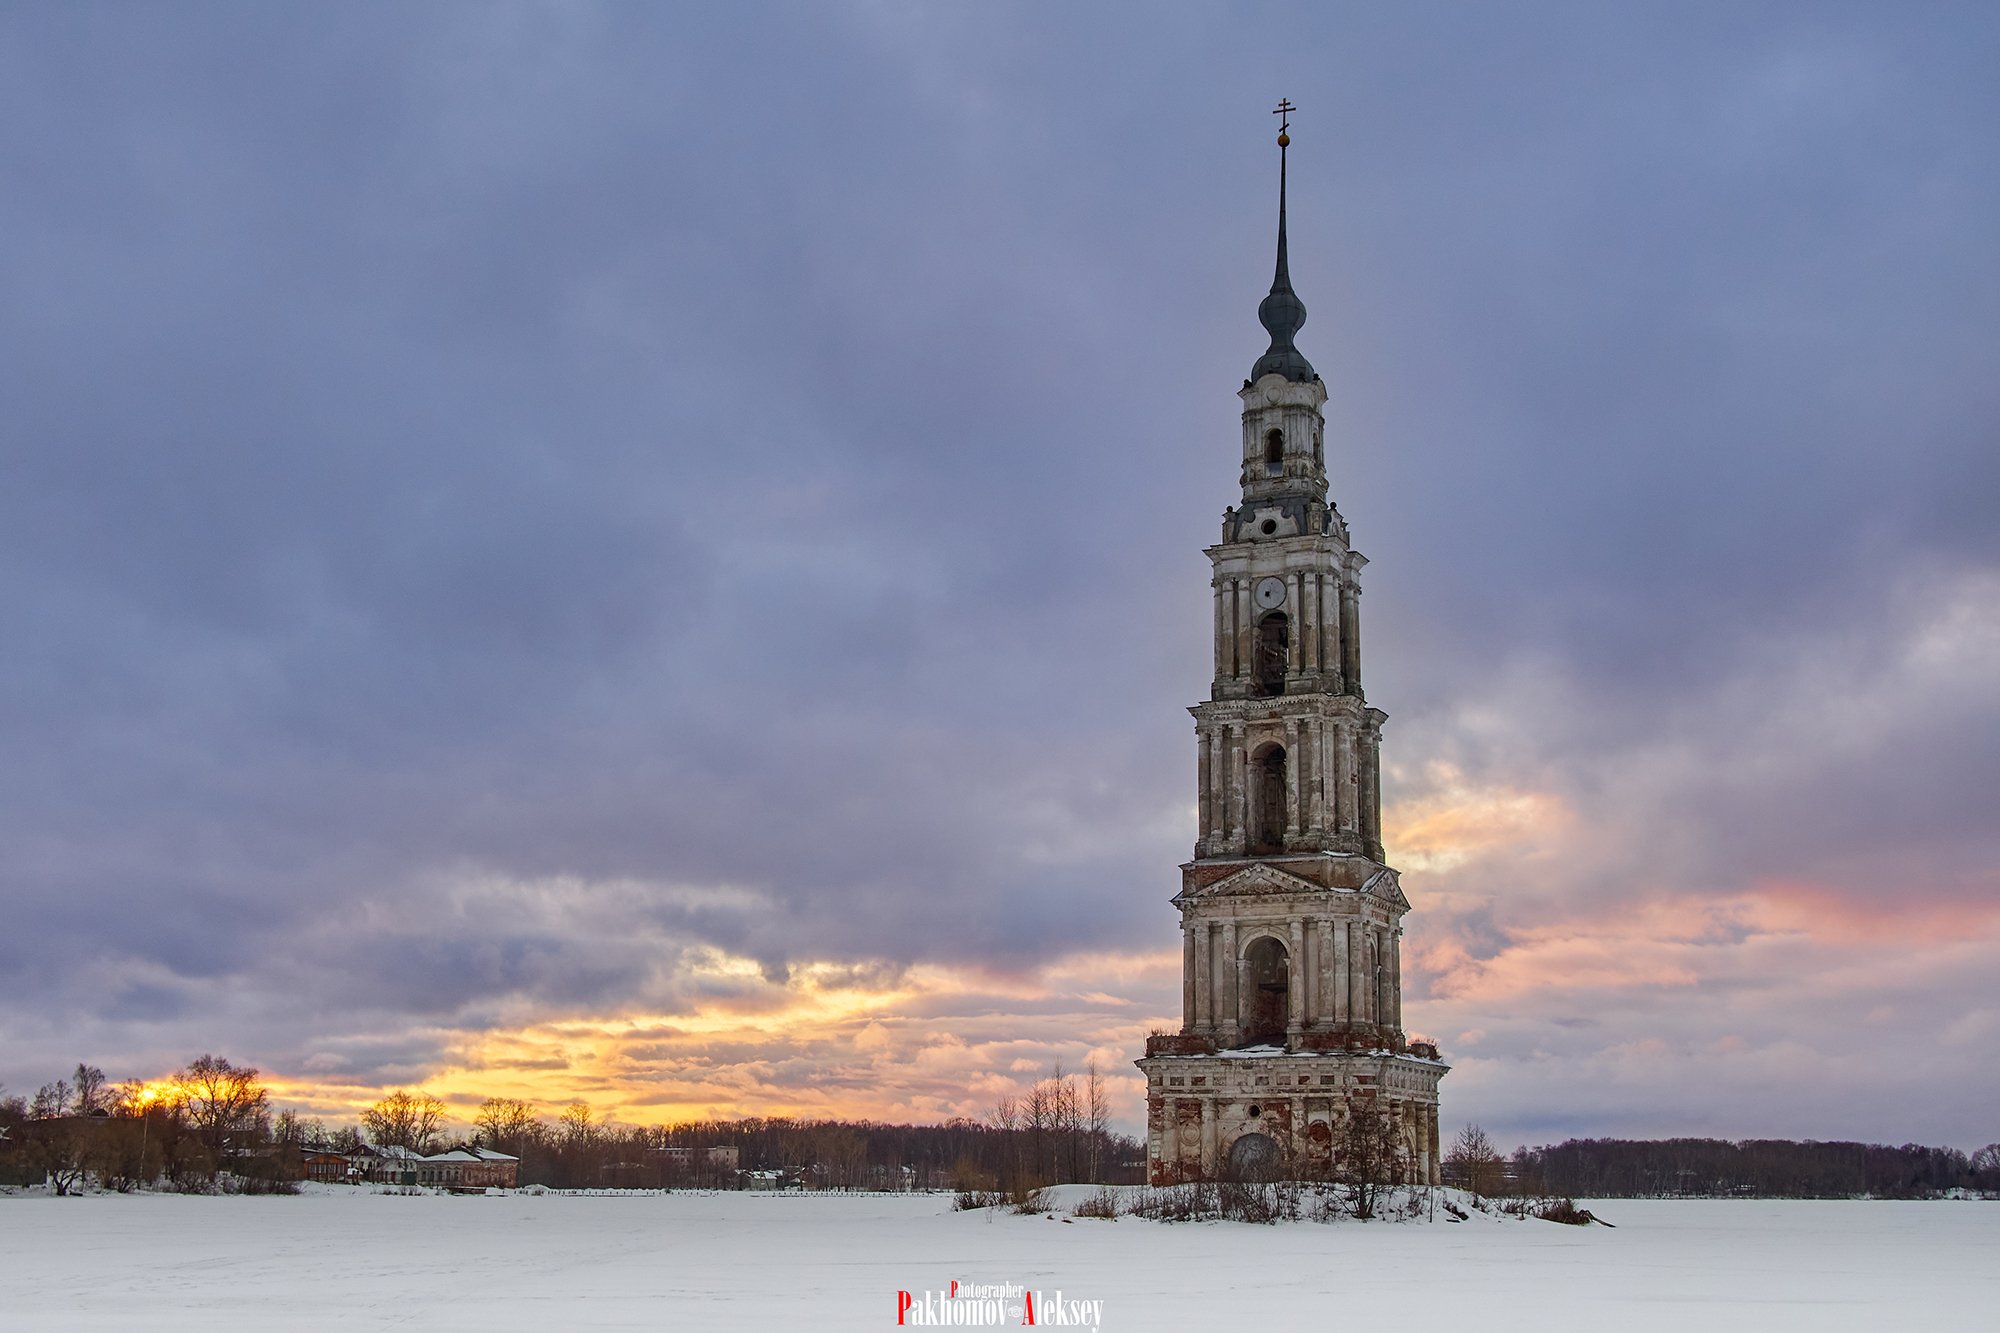 landscape, nature, color,  russia, outdoor, arhitecture, church, sunset, Aleksey Pakhomov